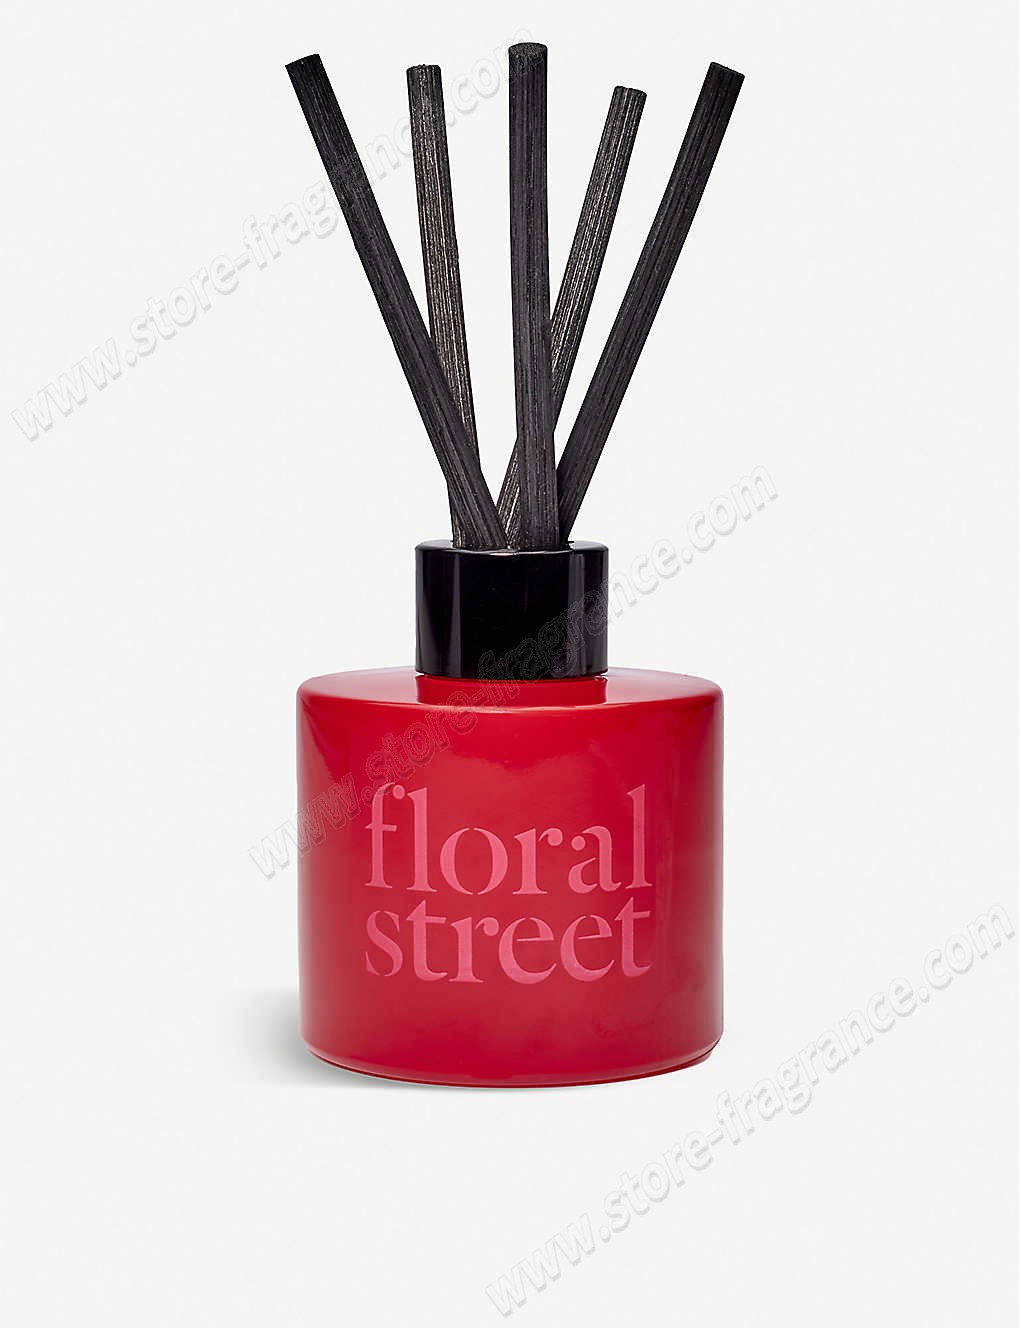 FLORAL STREET/Lipstick scented diffuser 100ml Limit Offer - FLORAL STREET/Lipstick scented diffuser 100ml Limit Offer